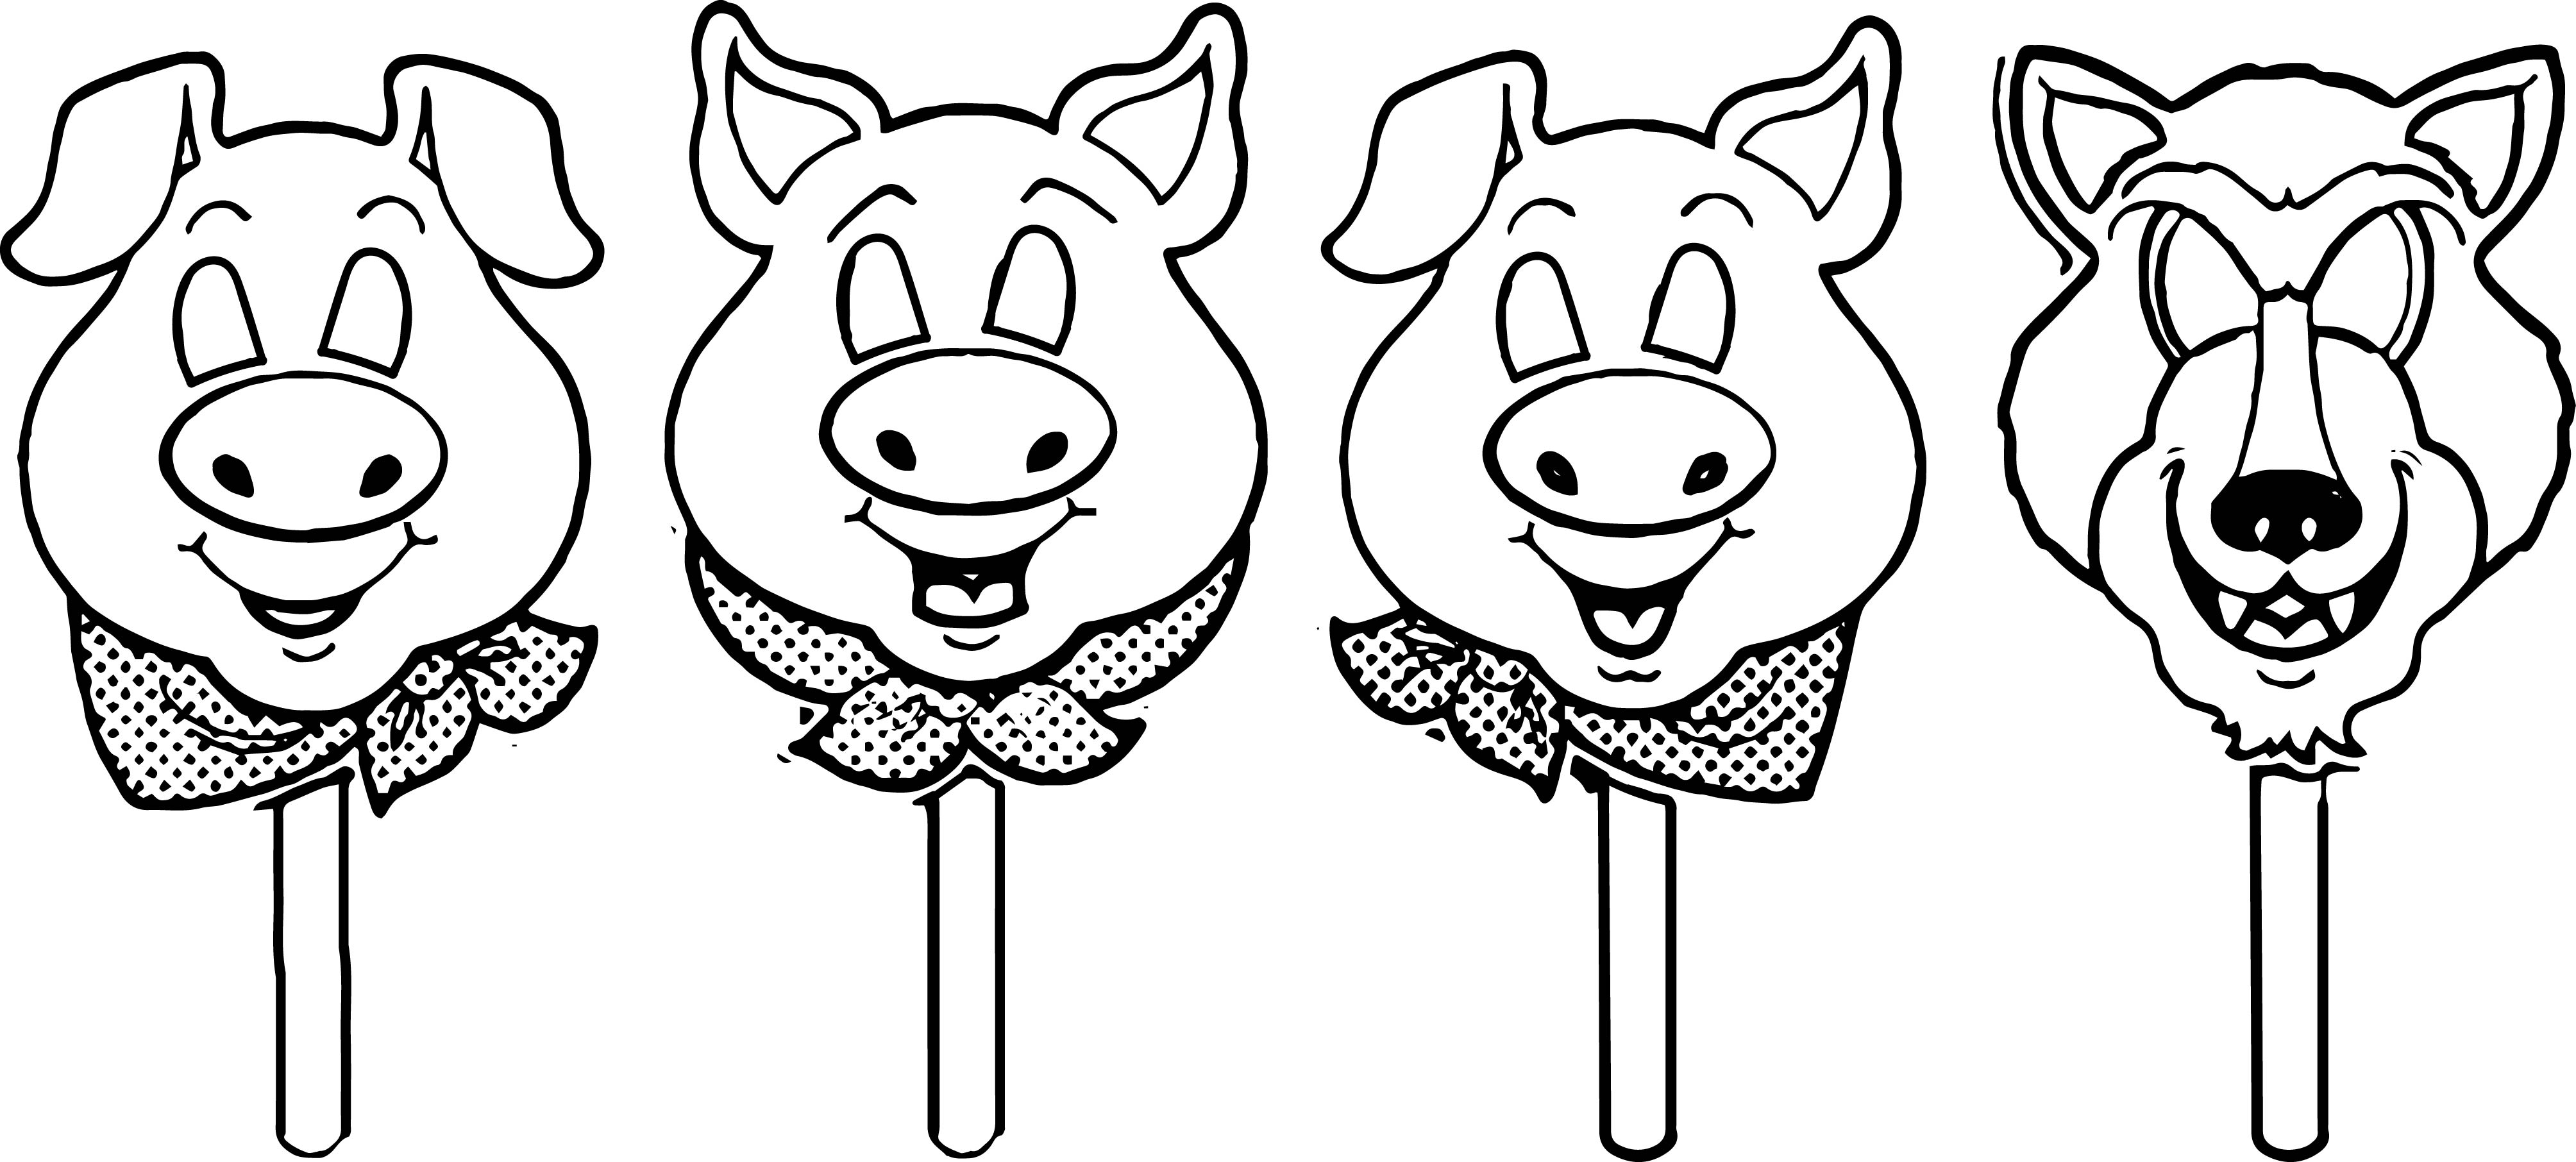 3-little-pigs-clipart-black-and-white-10-free-cliparts-download